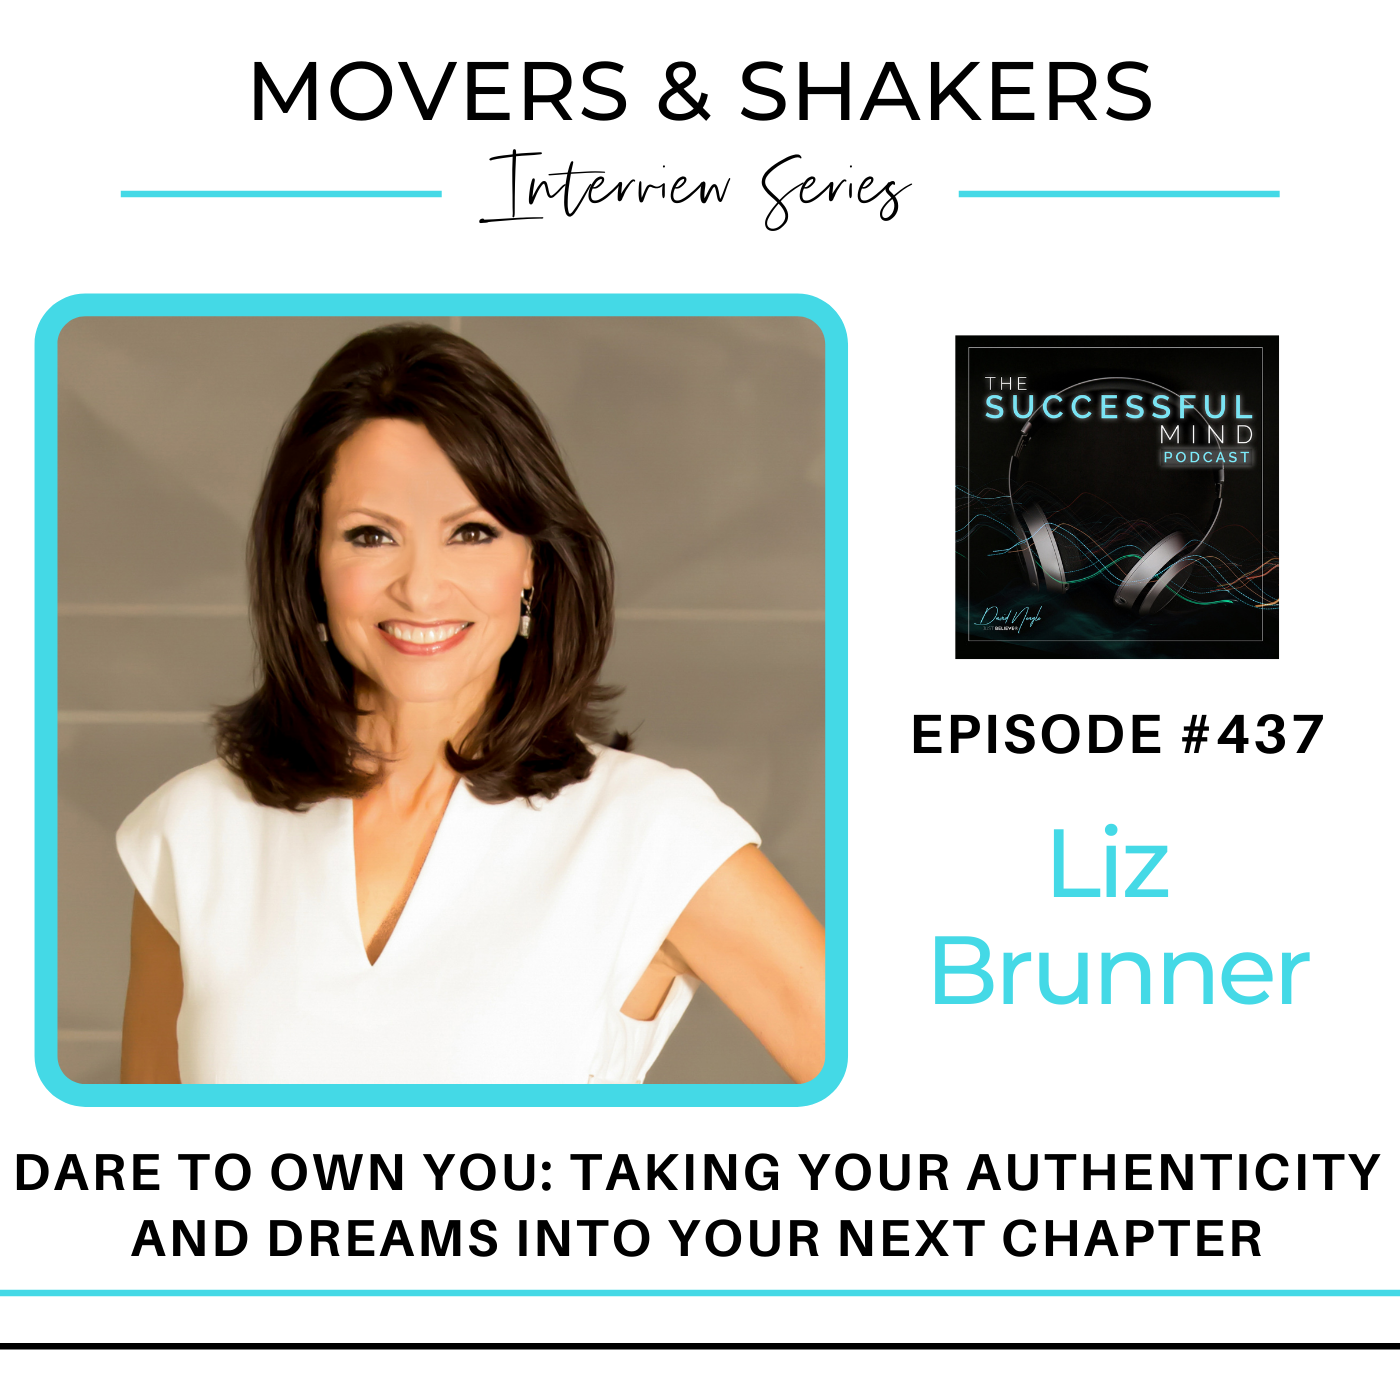 The Successful Mind Podcast - Movers & Shakers - Liz Brunner